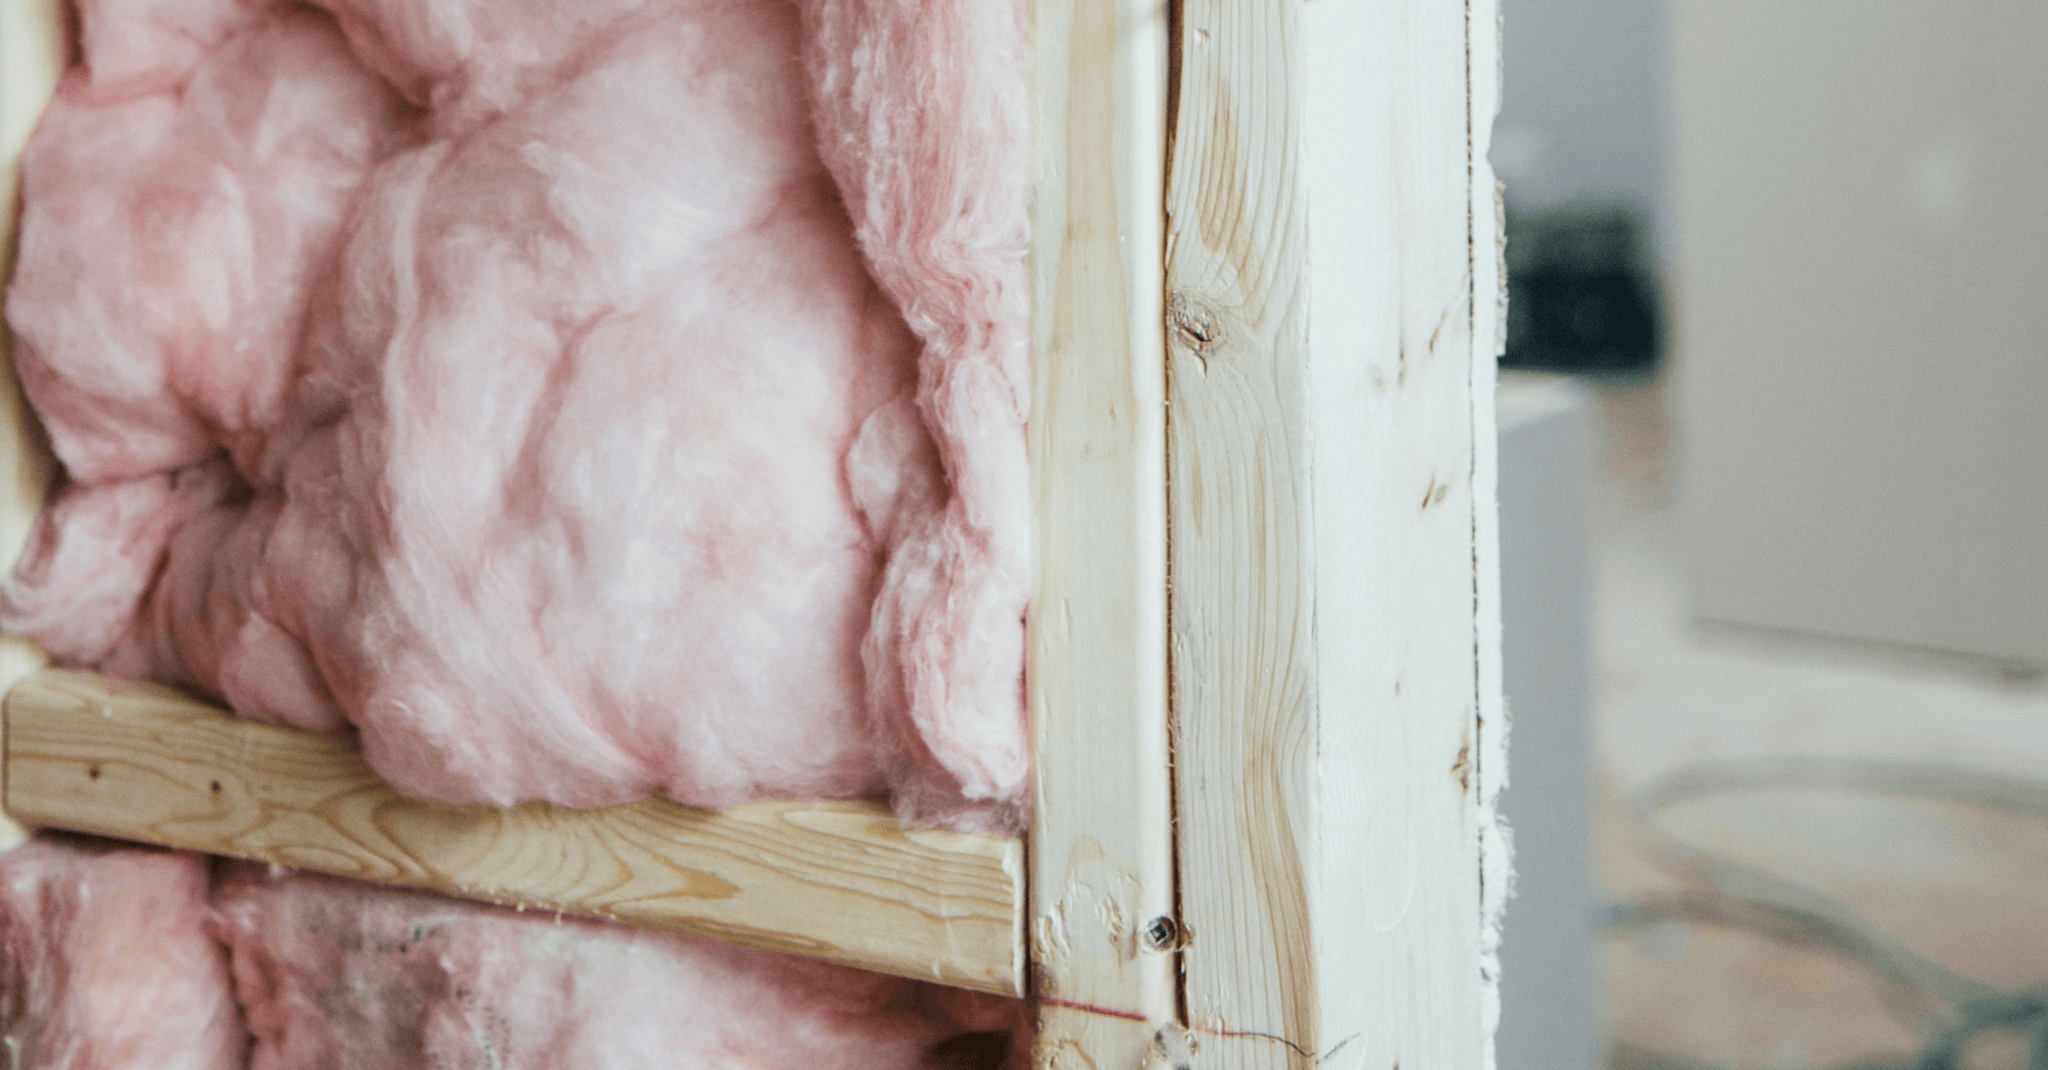 Photograph showing the inside of a wall within a home, filled with pink cavity wall insulation.